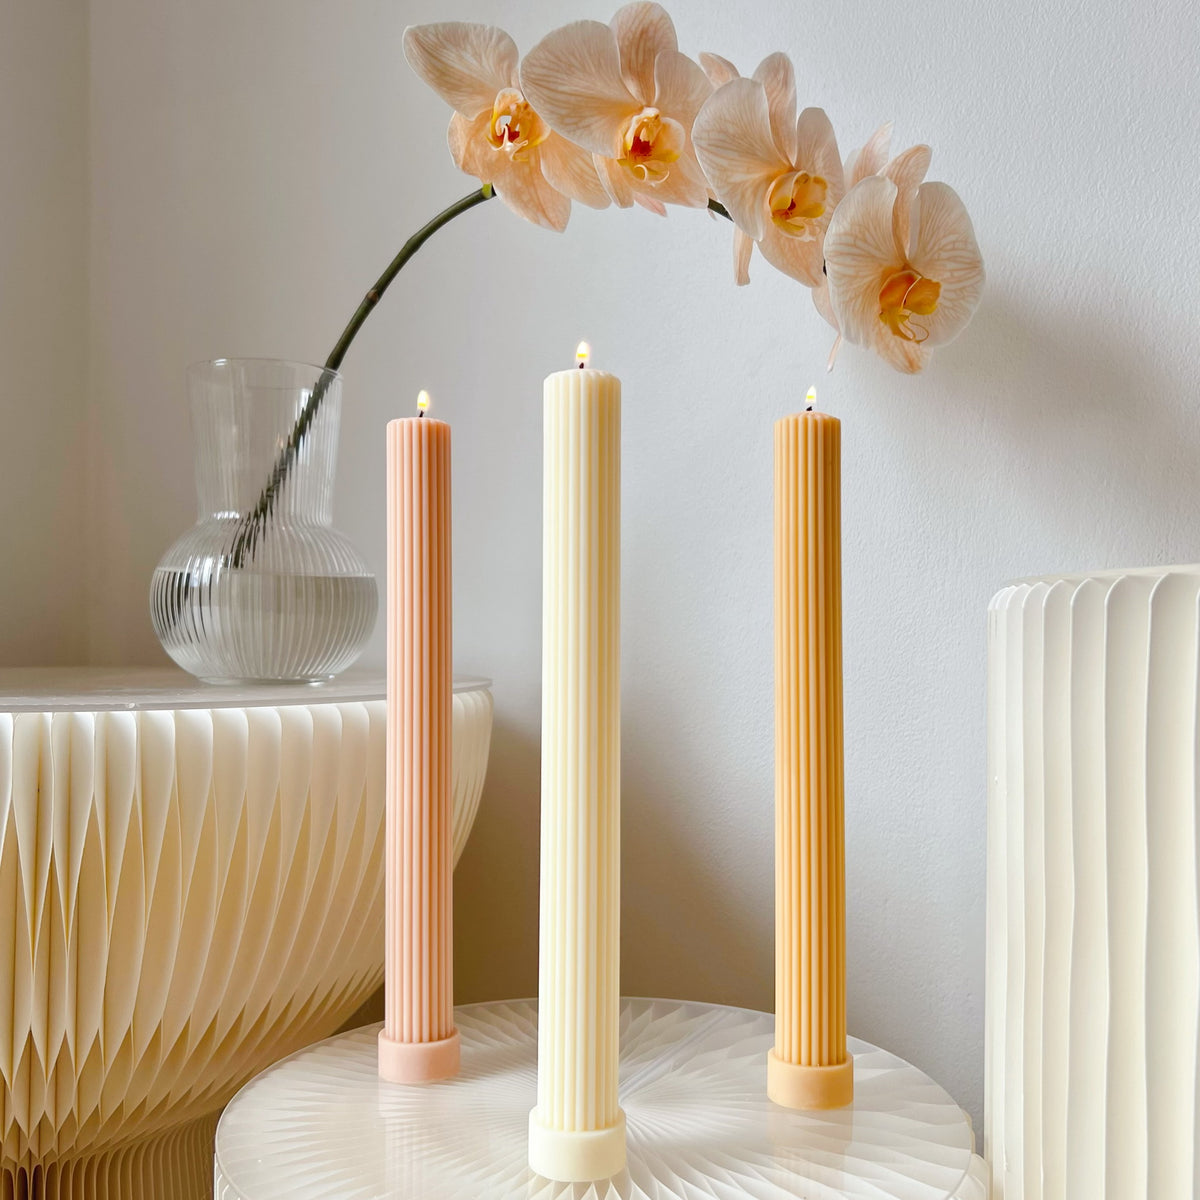 Ribbed Stick Dripless Taper Candle, Unscented Diner Candle, Paraffin-free Candlesticks, Freestanding Taper Candles, LMJ Candles